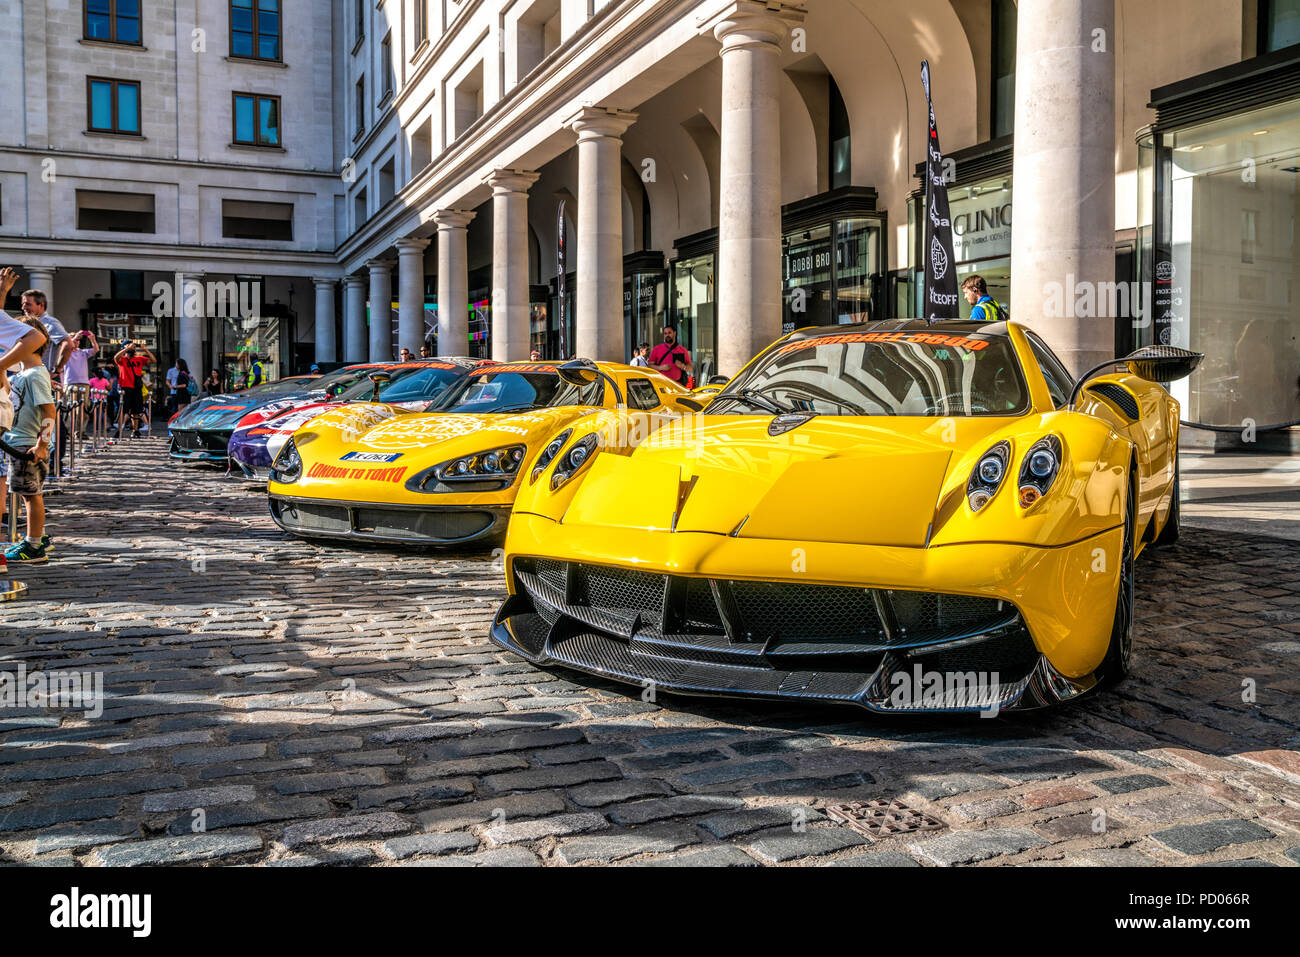 4 August 2018 - London, England. Unique supercar display in Covent Garden. Yellow Pagani Zonda and other cars participating in Gumball 3000 rally Stock Photo